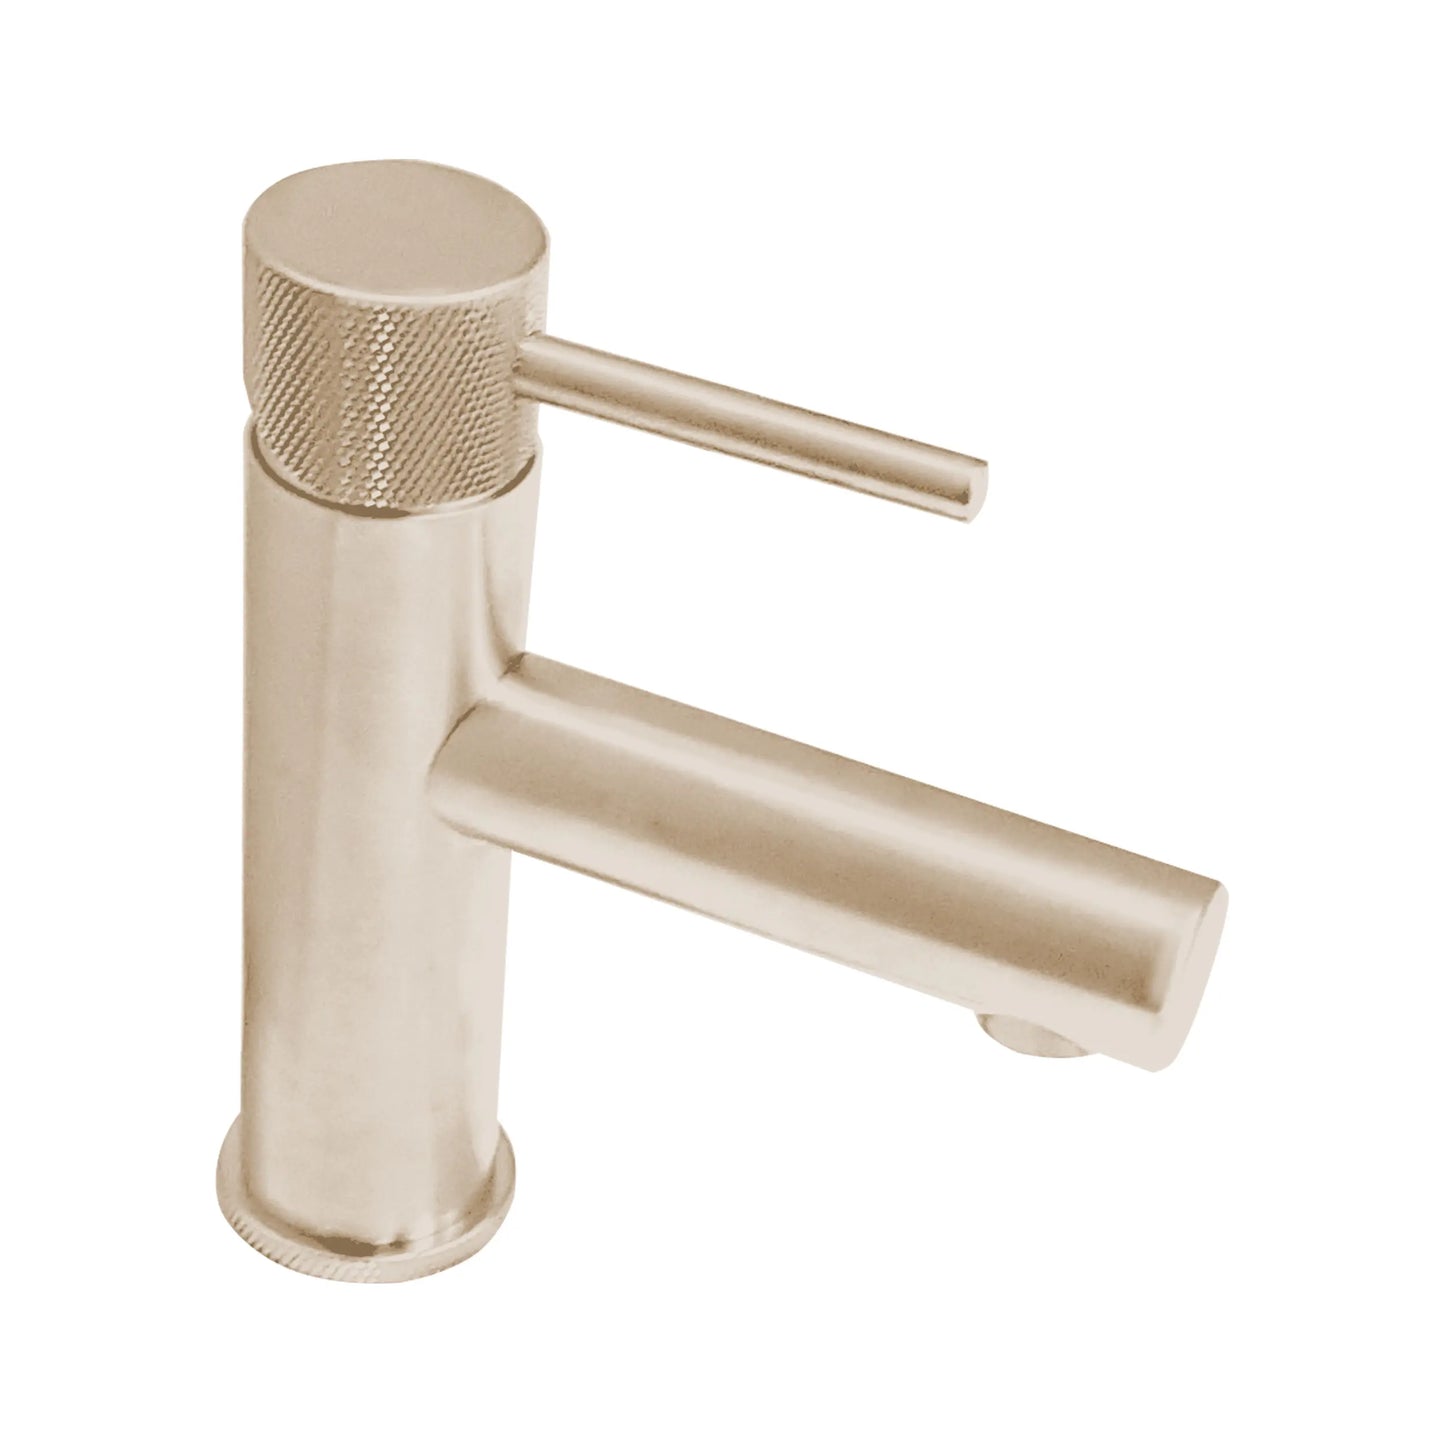 Aquadesign Products Single Hole Lav – Drain Included (Contempo R1737K) - Brushed Nickel